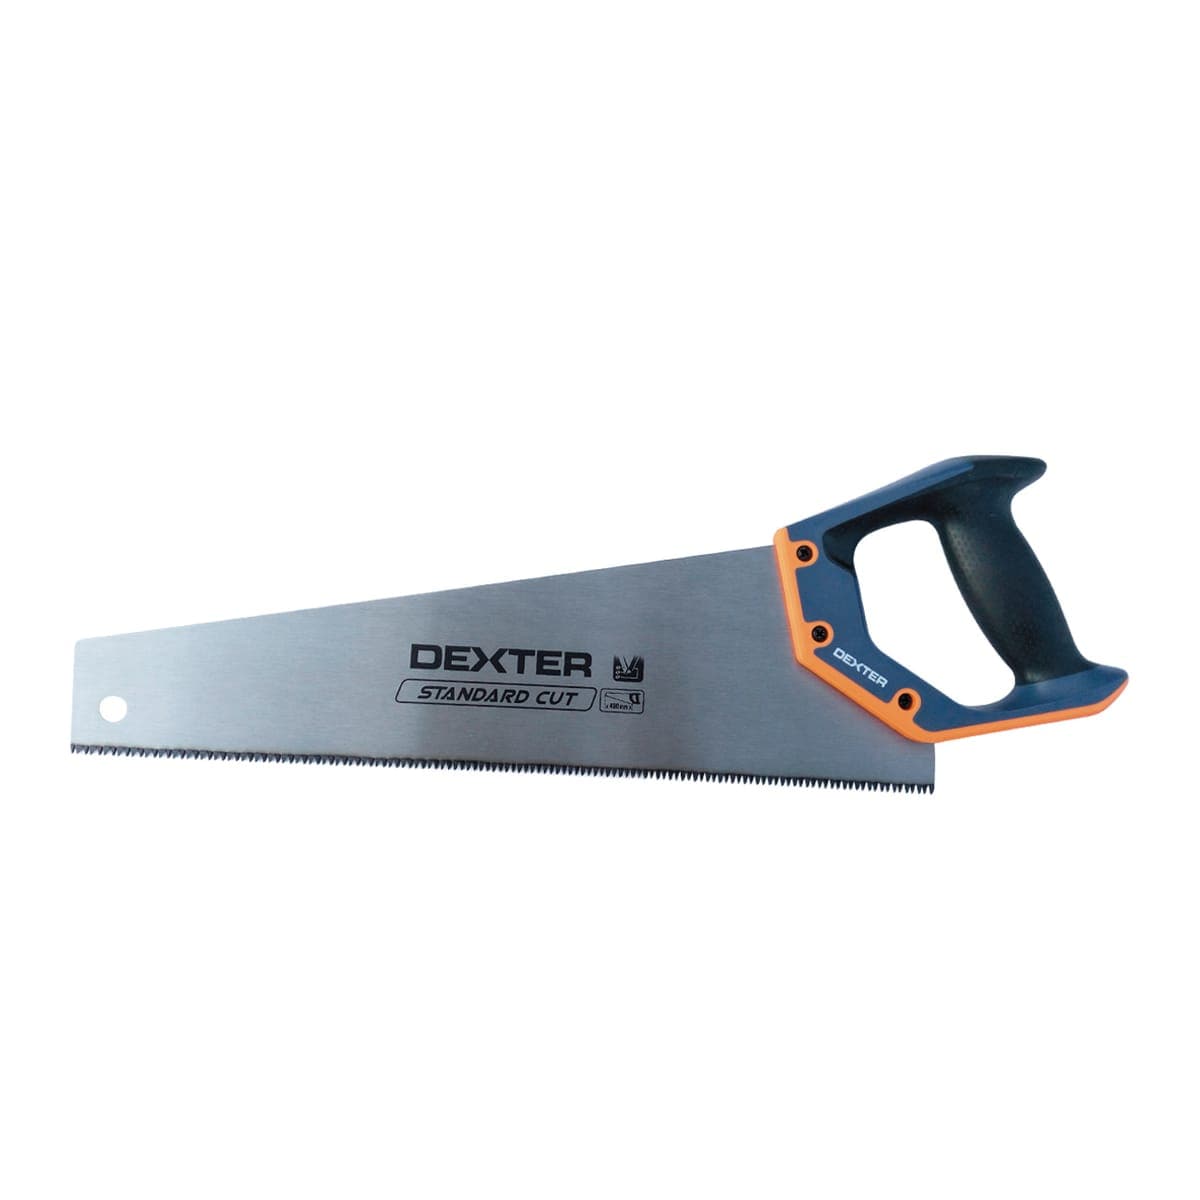 DEXTER 400 MM SAW FOR WOOD RUBBER GRIP,STEEL BLADE MEDIUM TOOTHING - best price from Maltashopper.com BR400001247